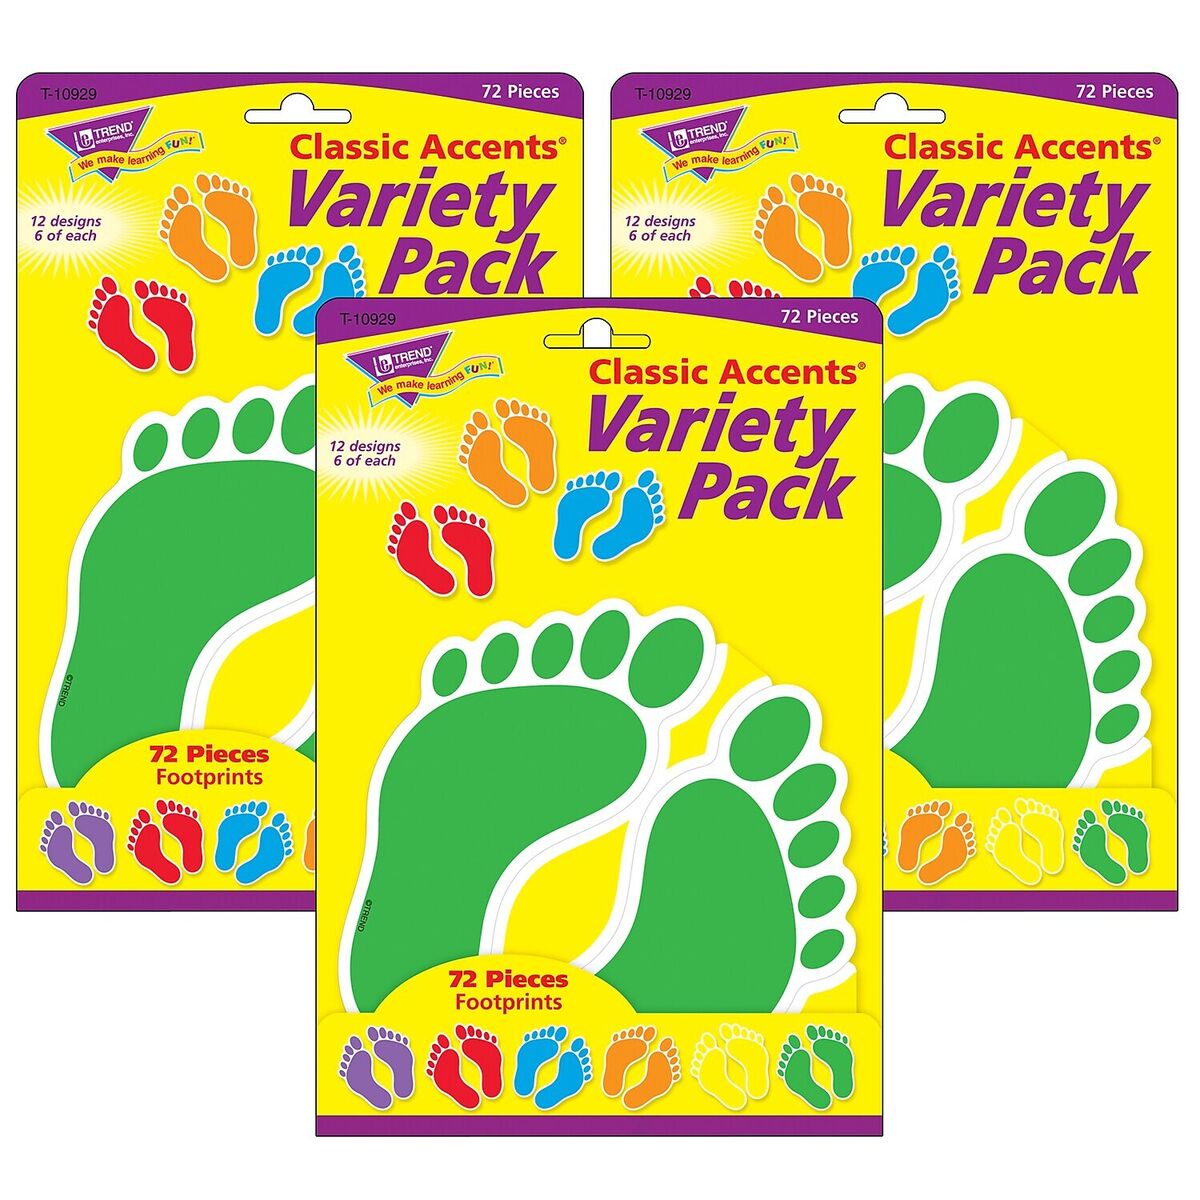 Trend T10929 Accents Footprints Classic Variety Pack - 5.5"